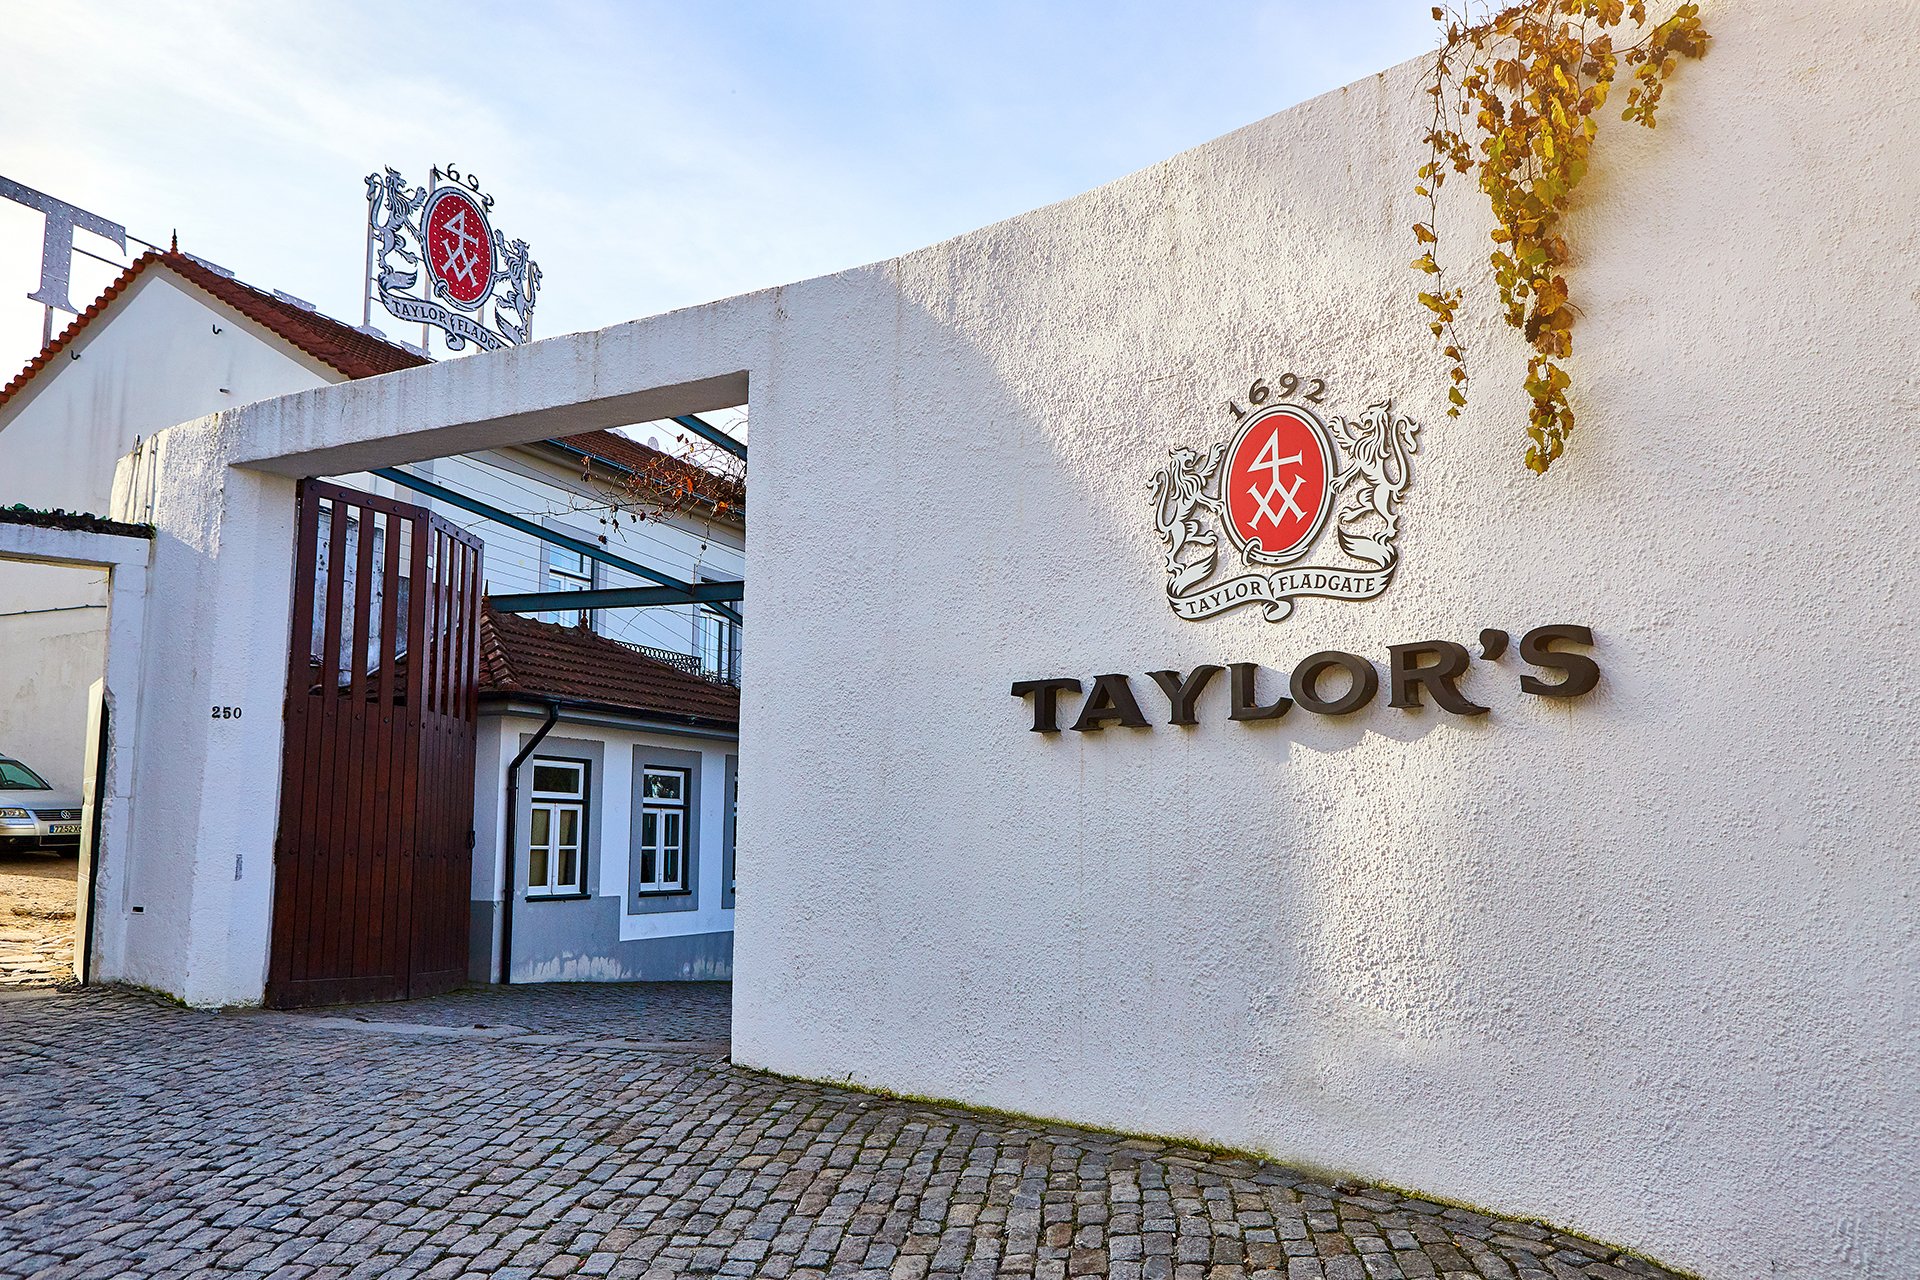 Entrance to Taylor's wine cellar museum